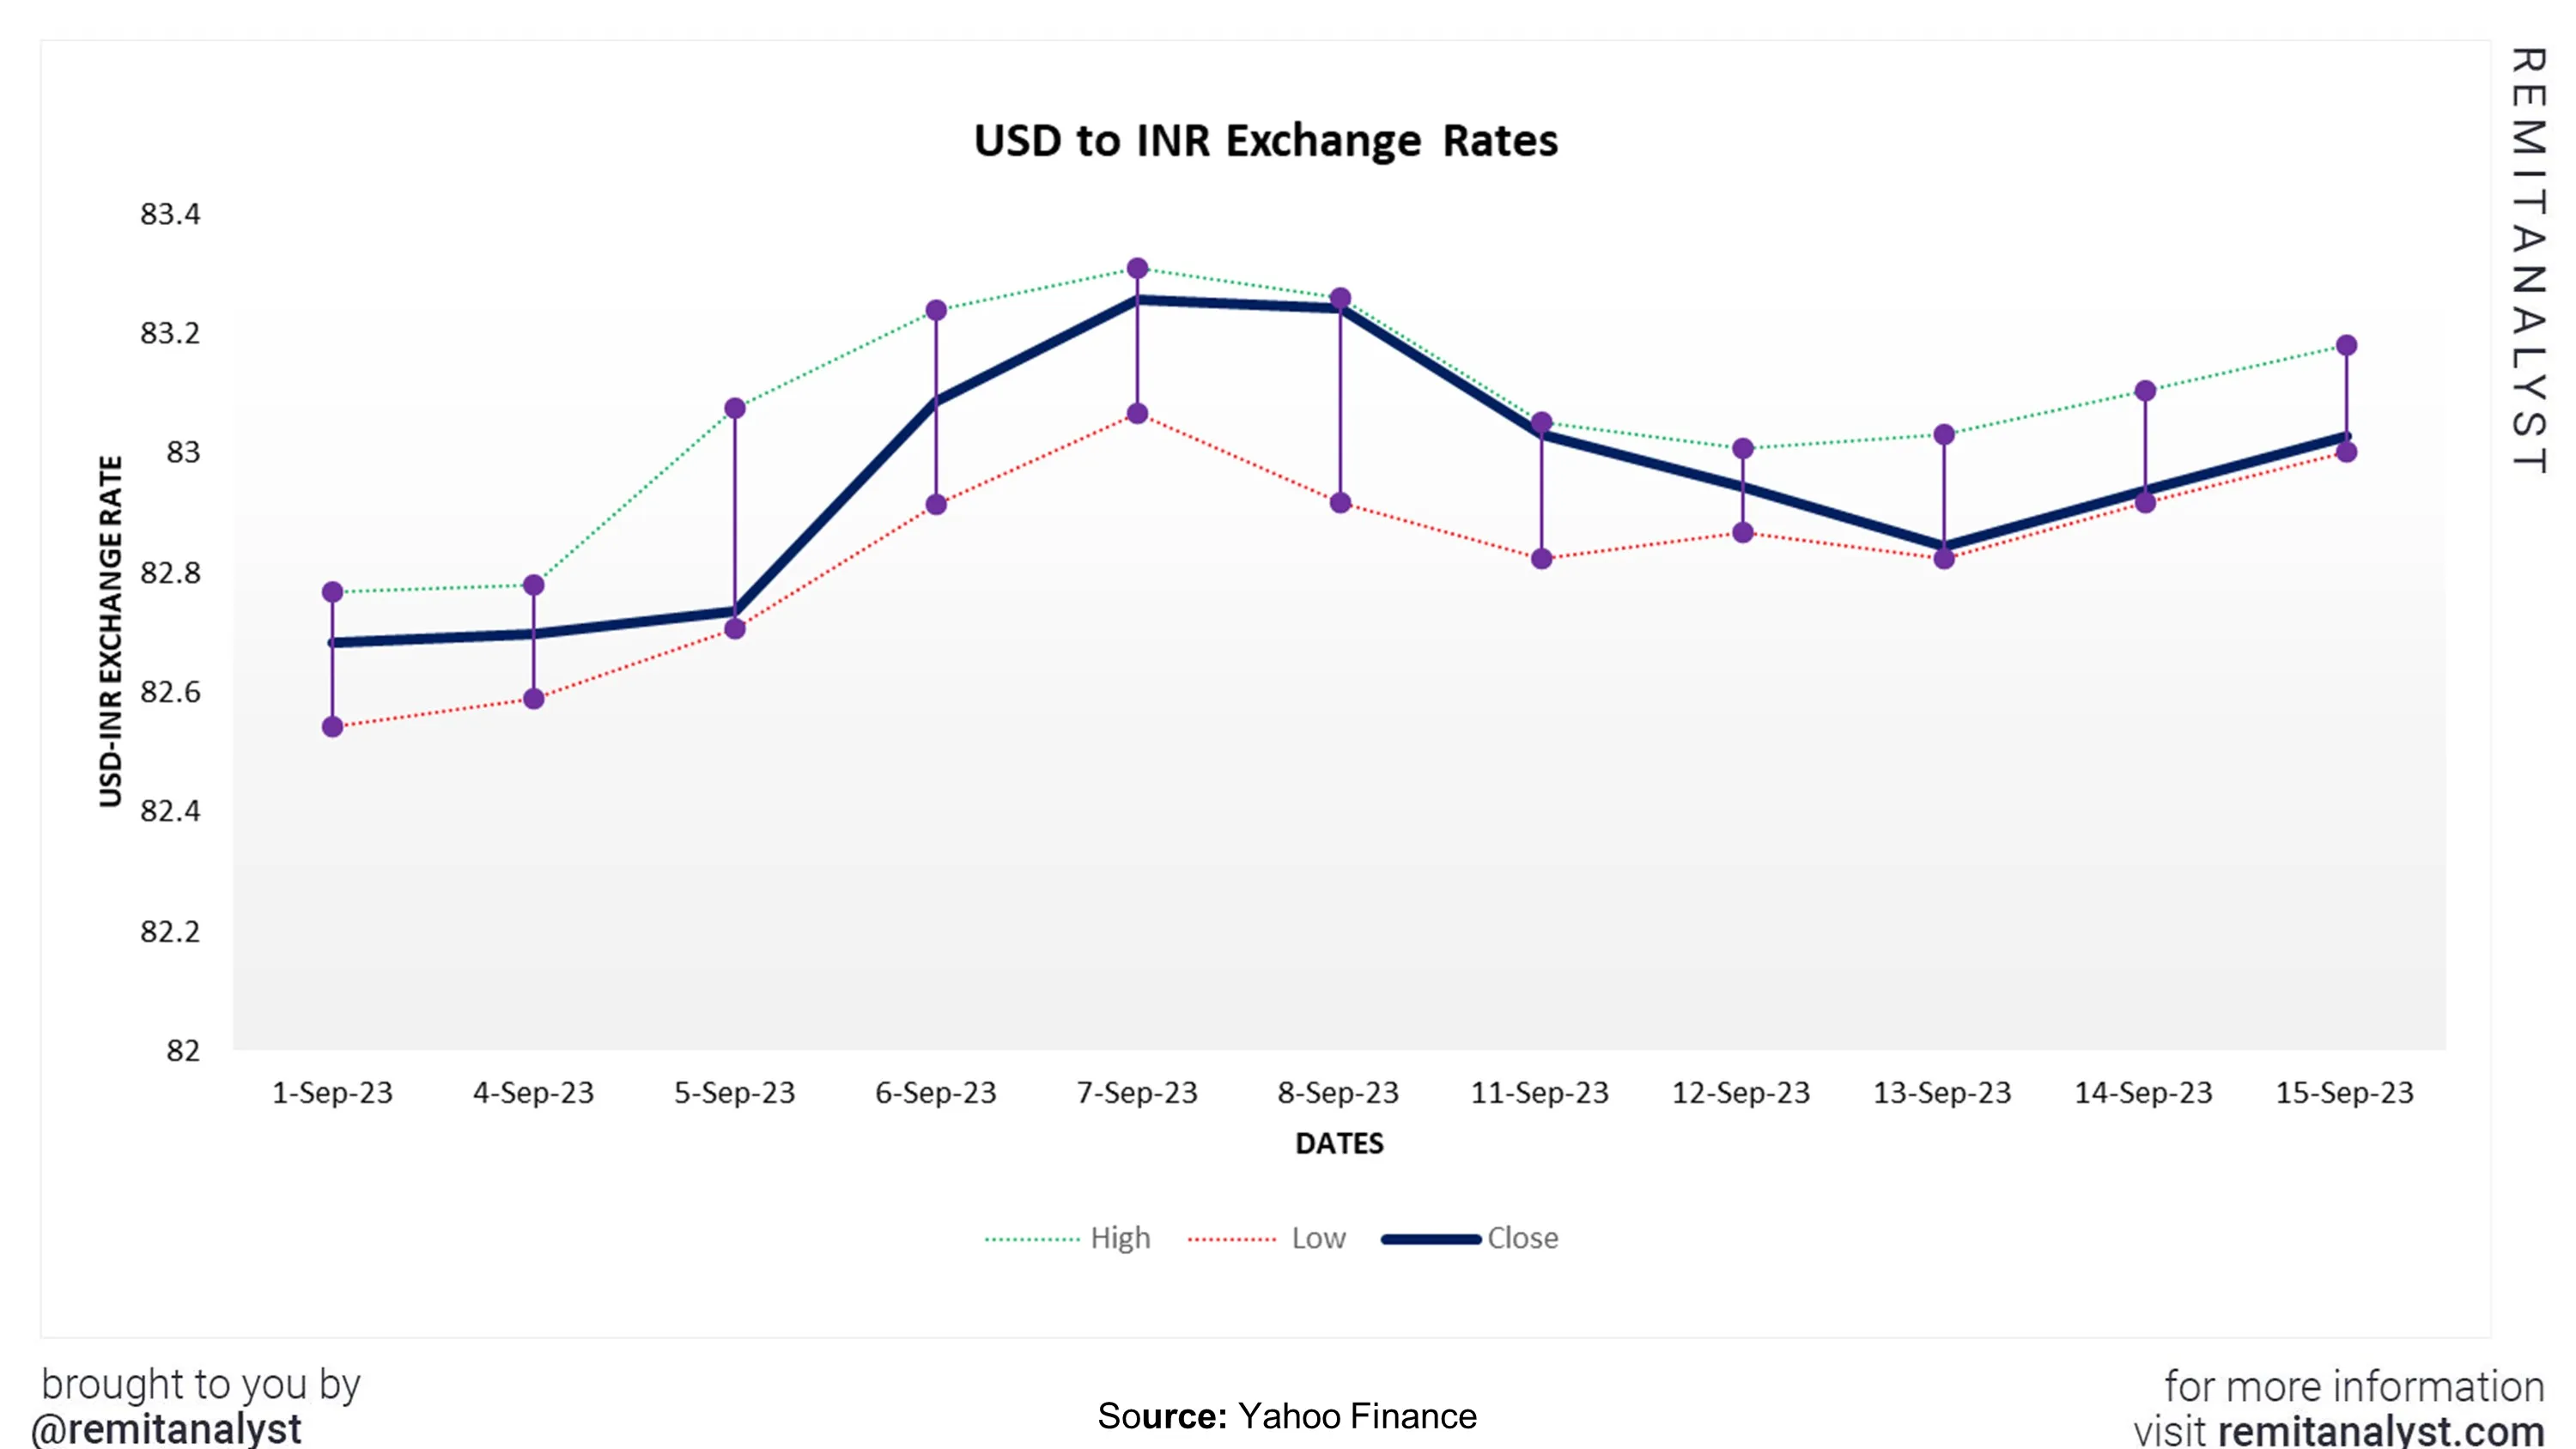 usd-to-inr-exchange-rate-from-1-sep-2023-to-15-sep-2023